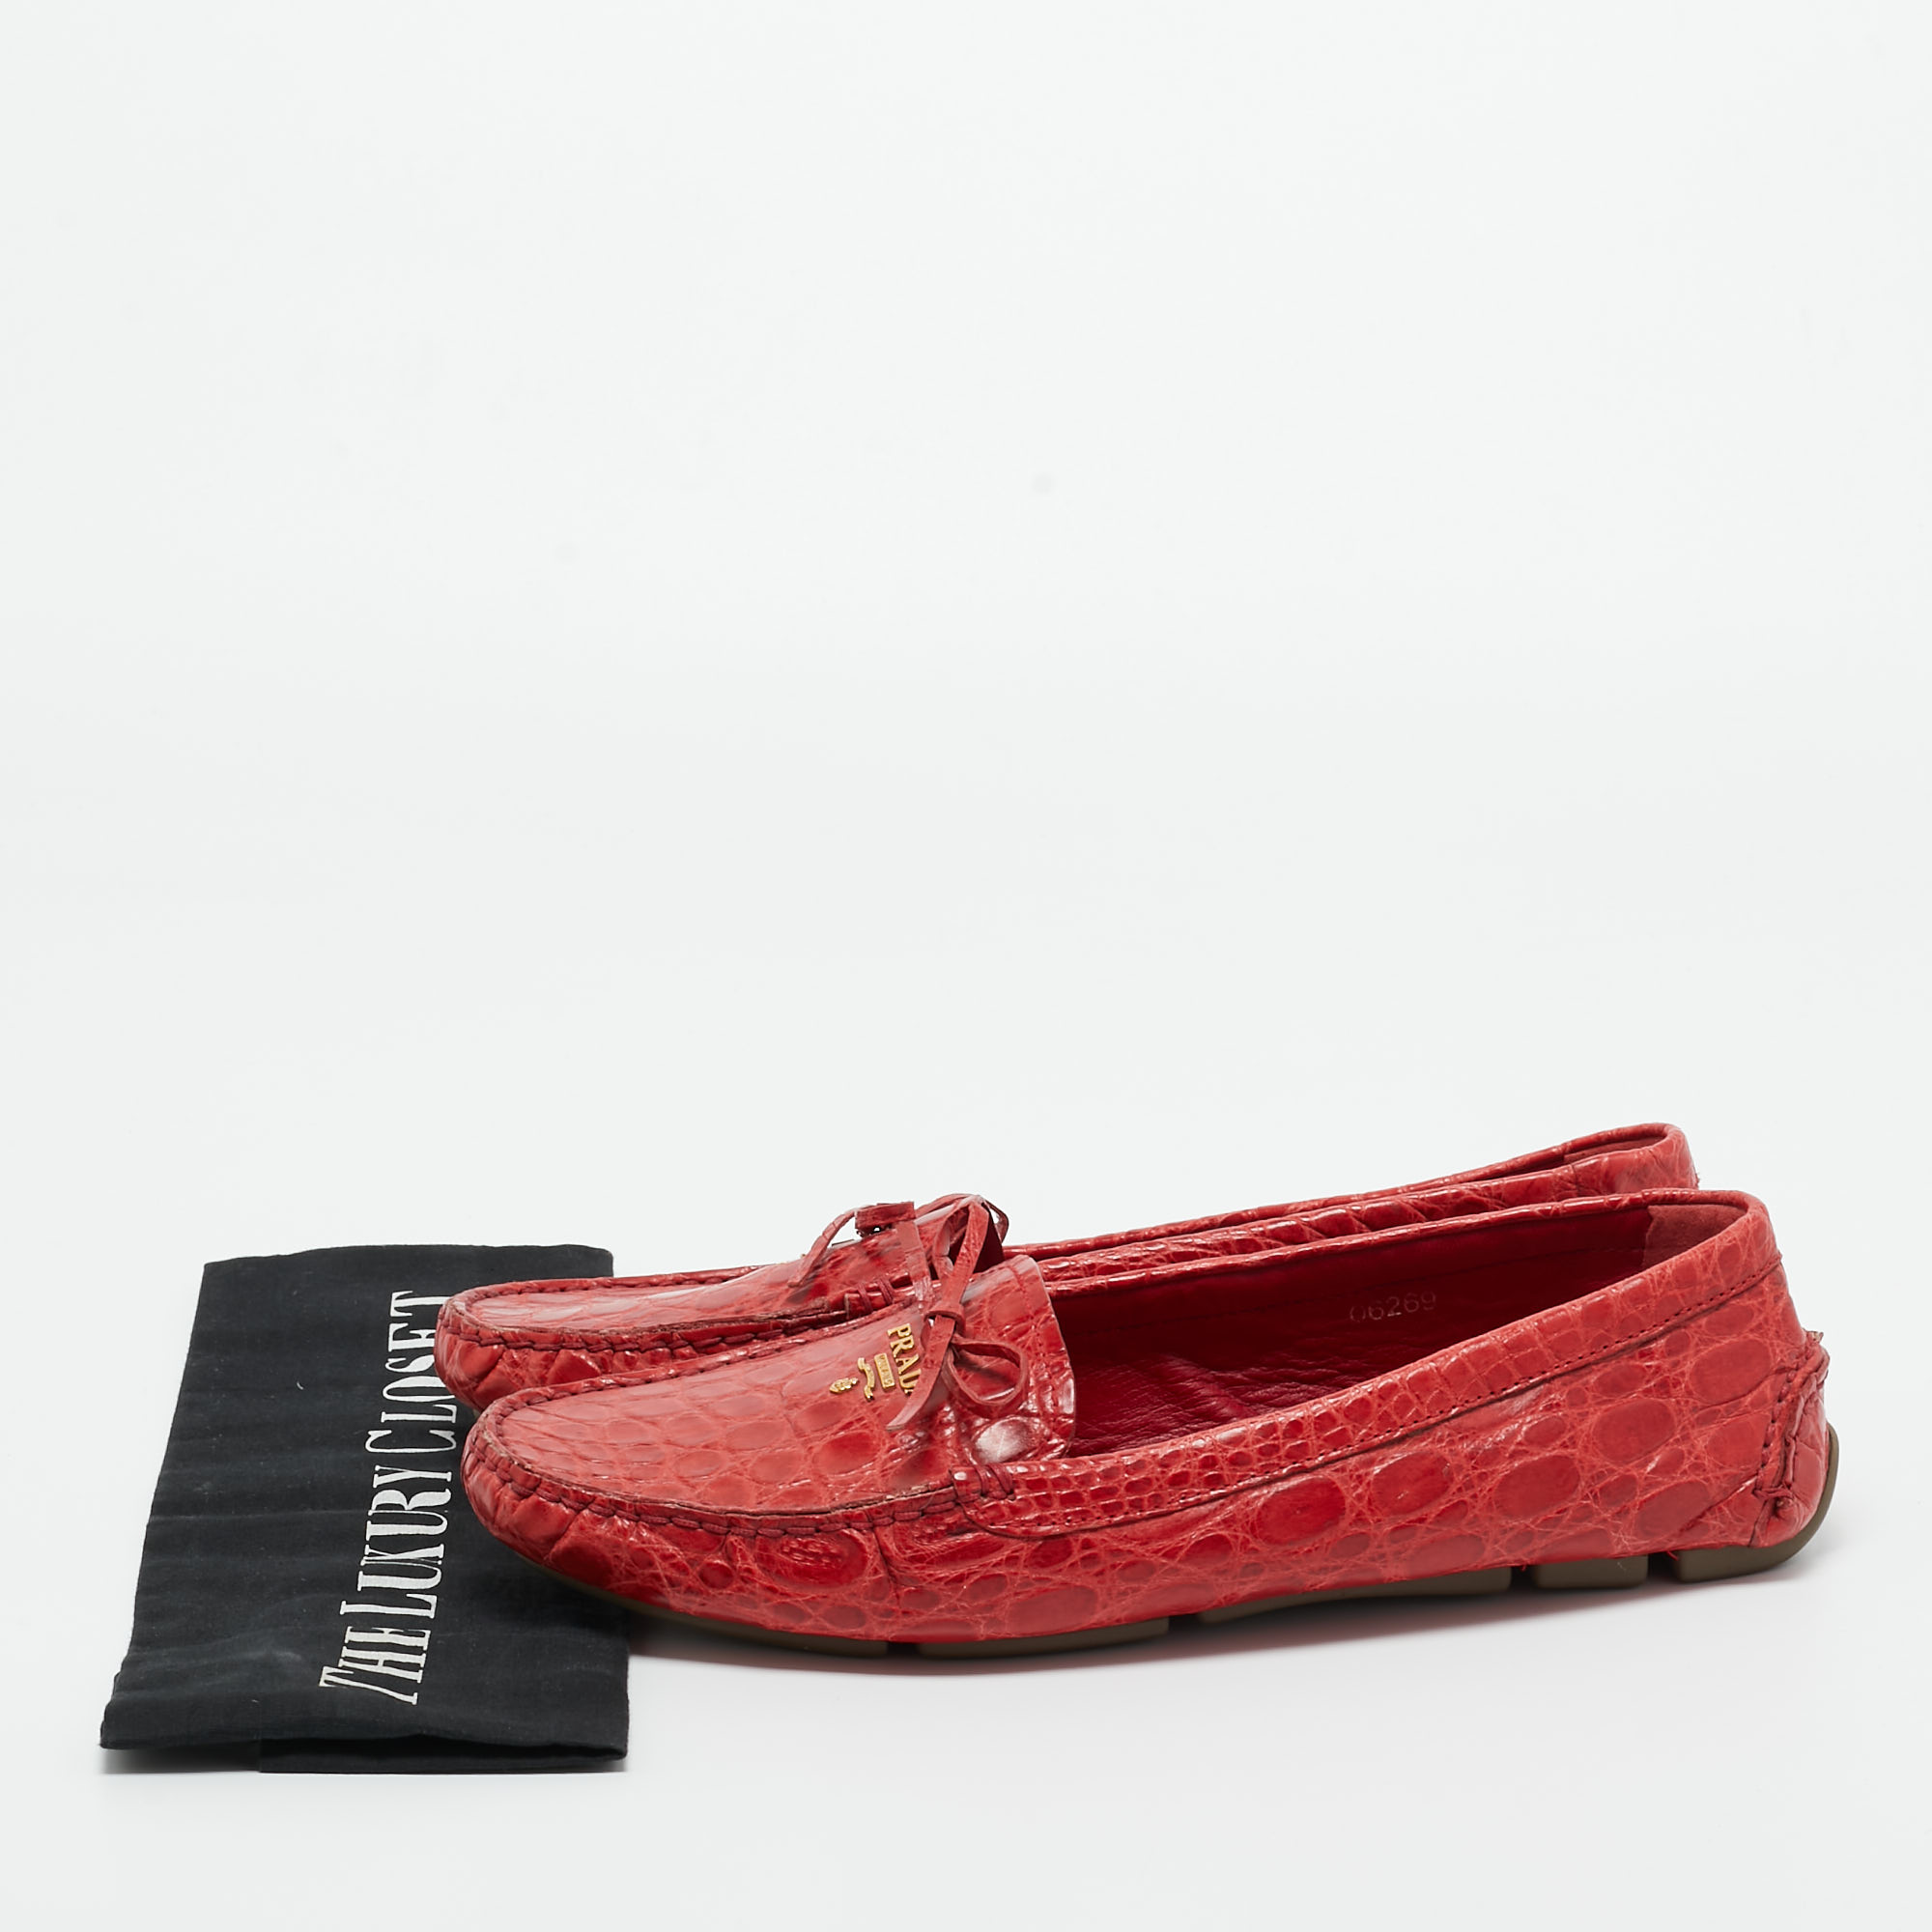 Prada Red Crocodile Leather Penny Loafers Size 40